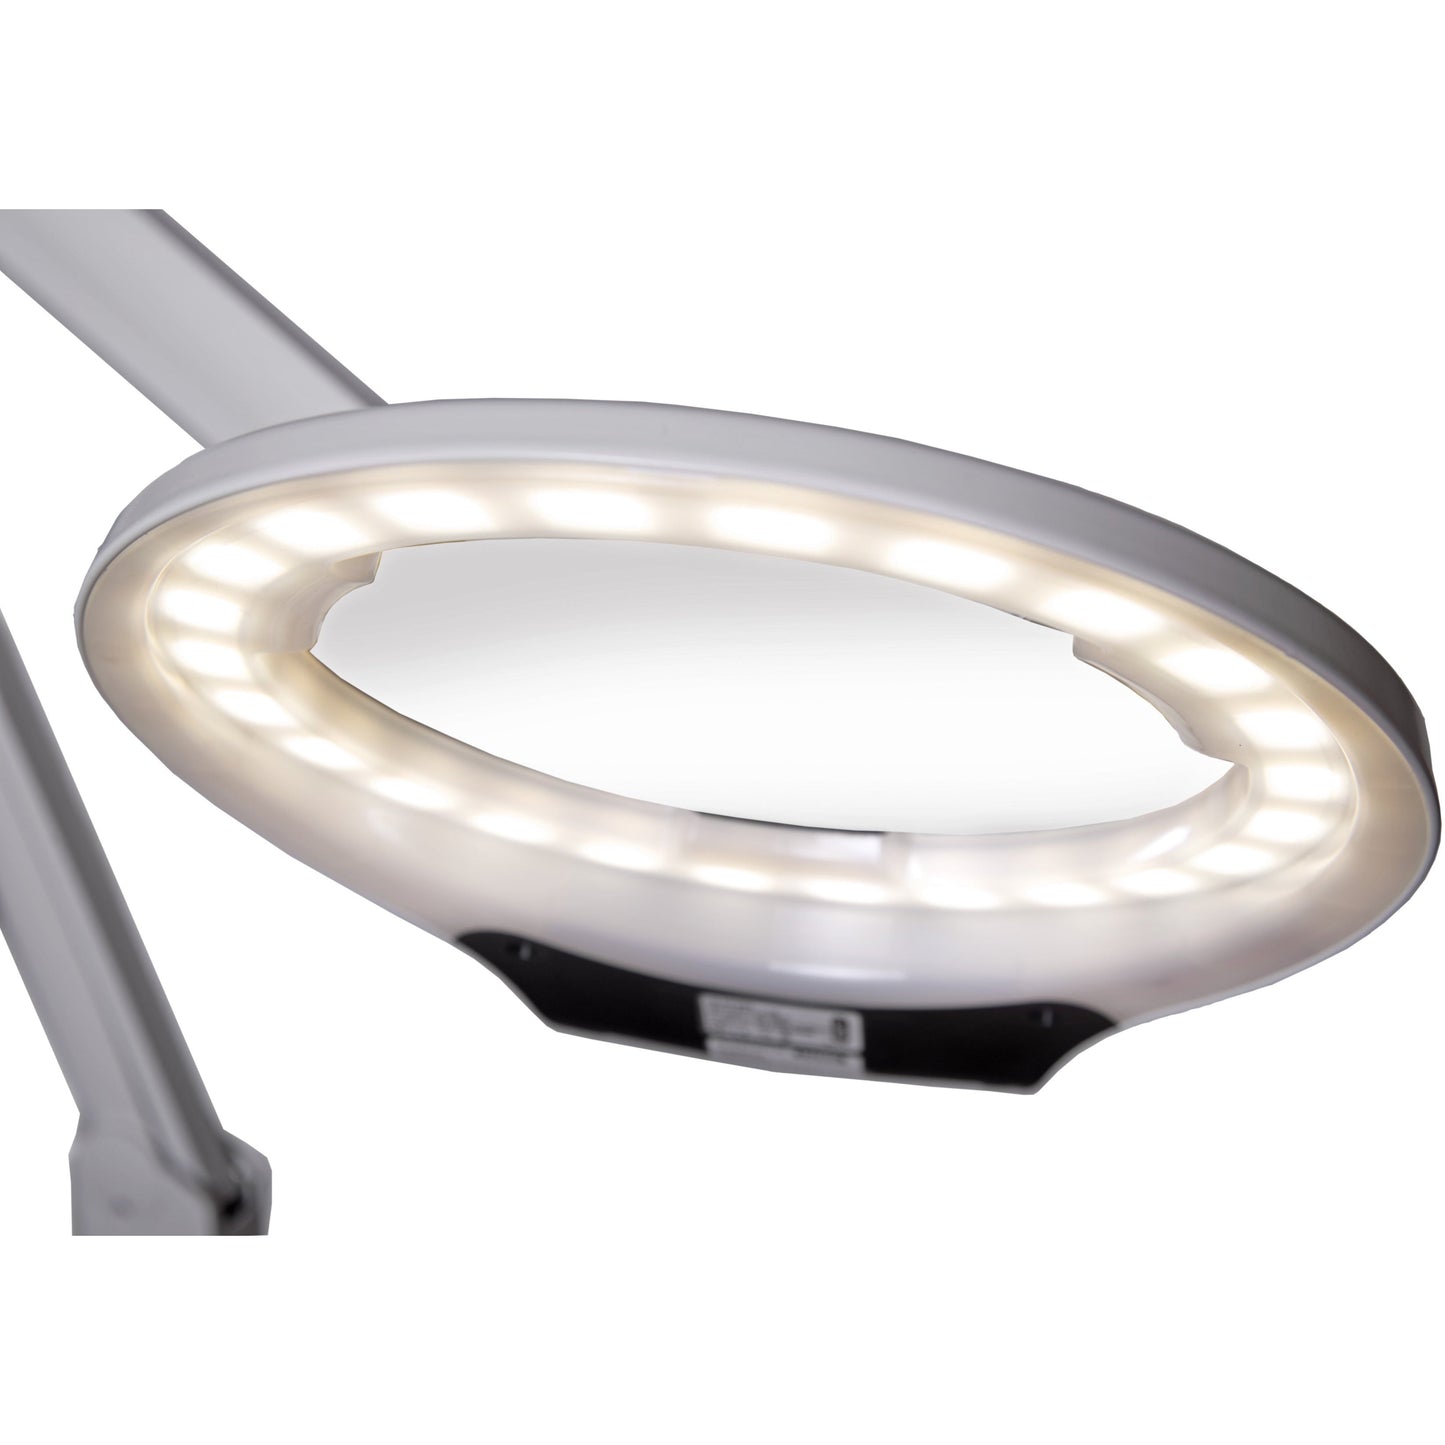 Glamox Luxo Circus LED Medical Illuminated Dimmable Magnifier with 5d Lens - CLEARANCE